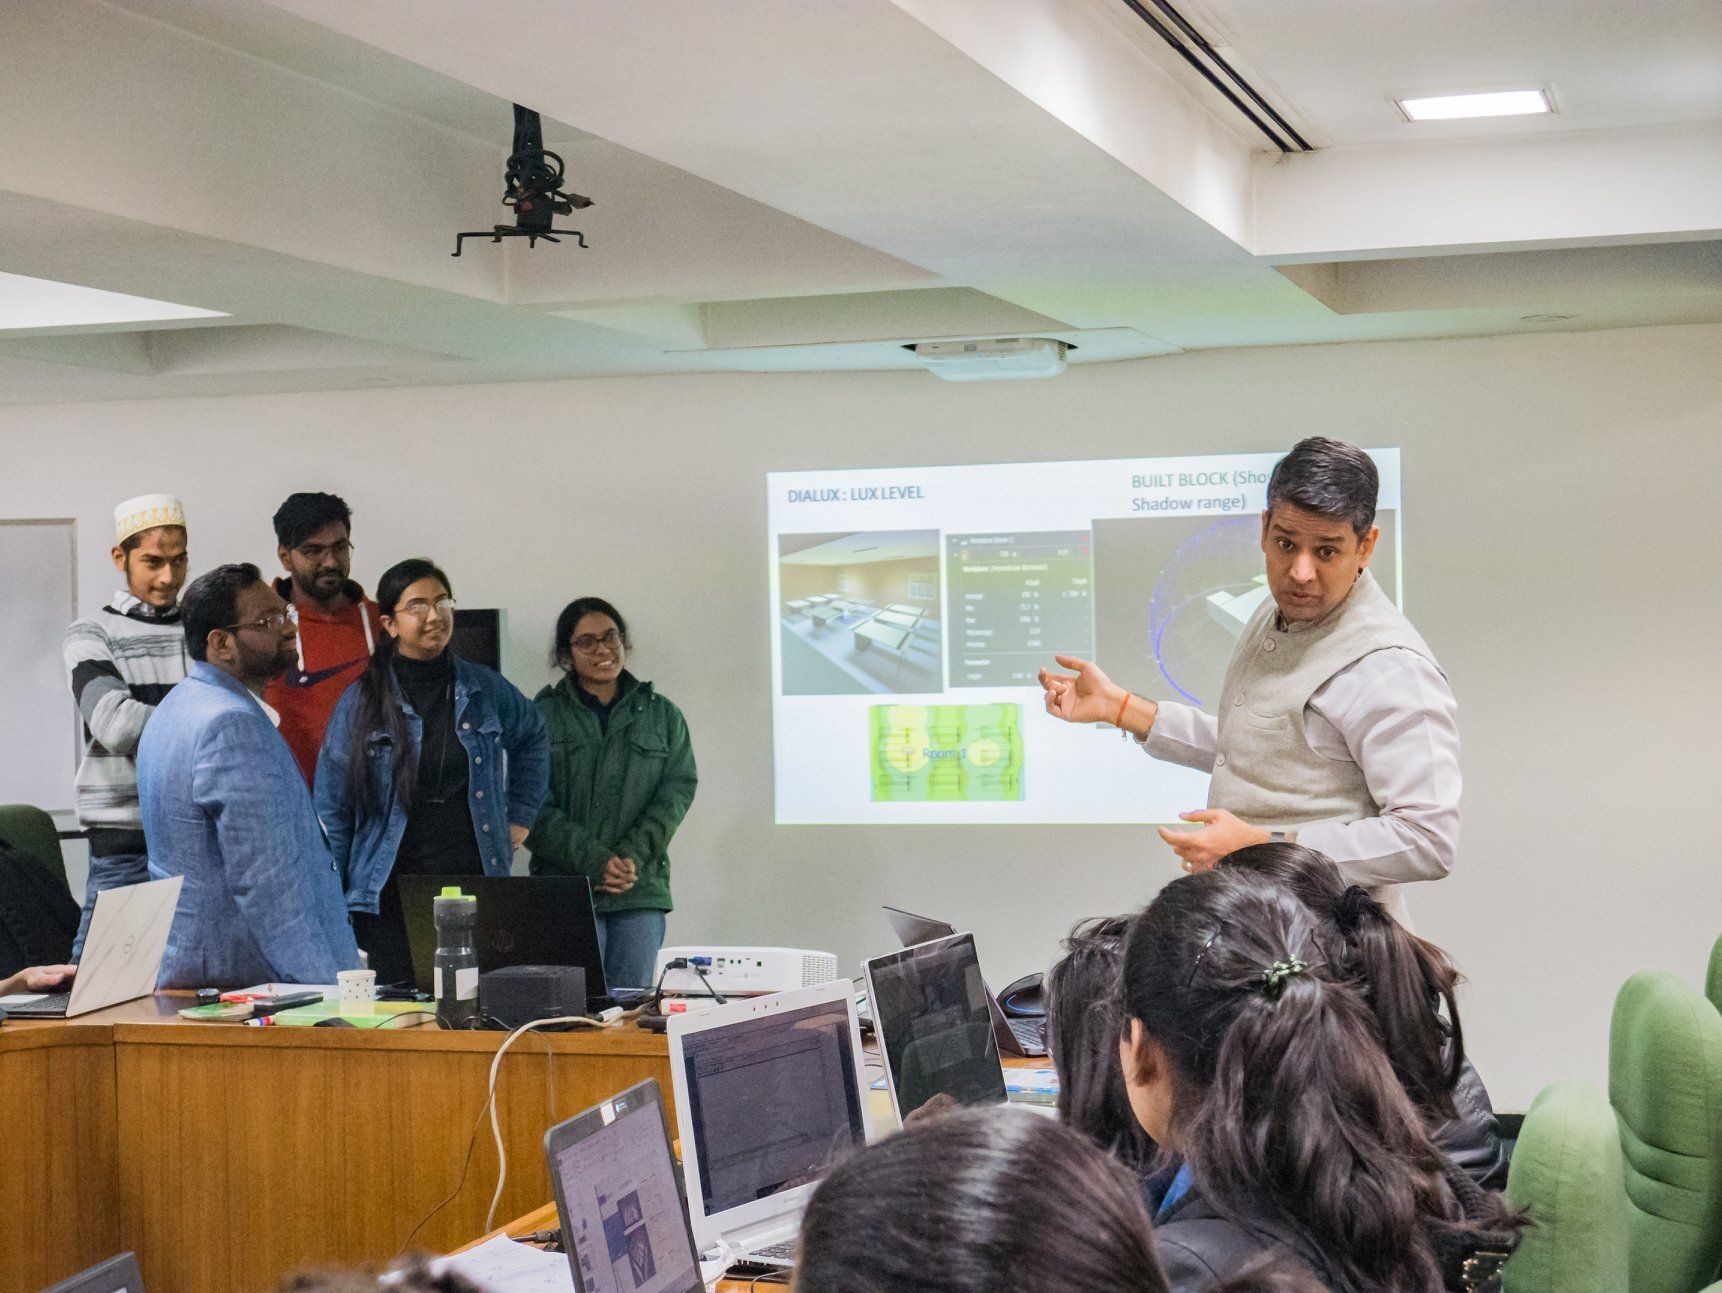 A professor giving a presentation to a group of students